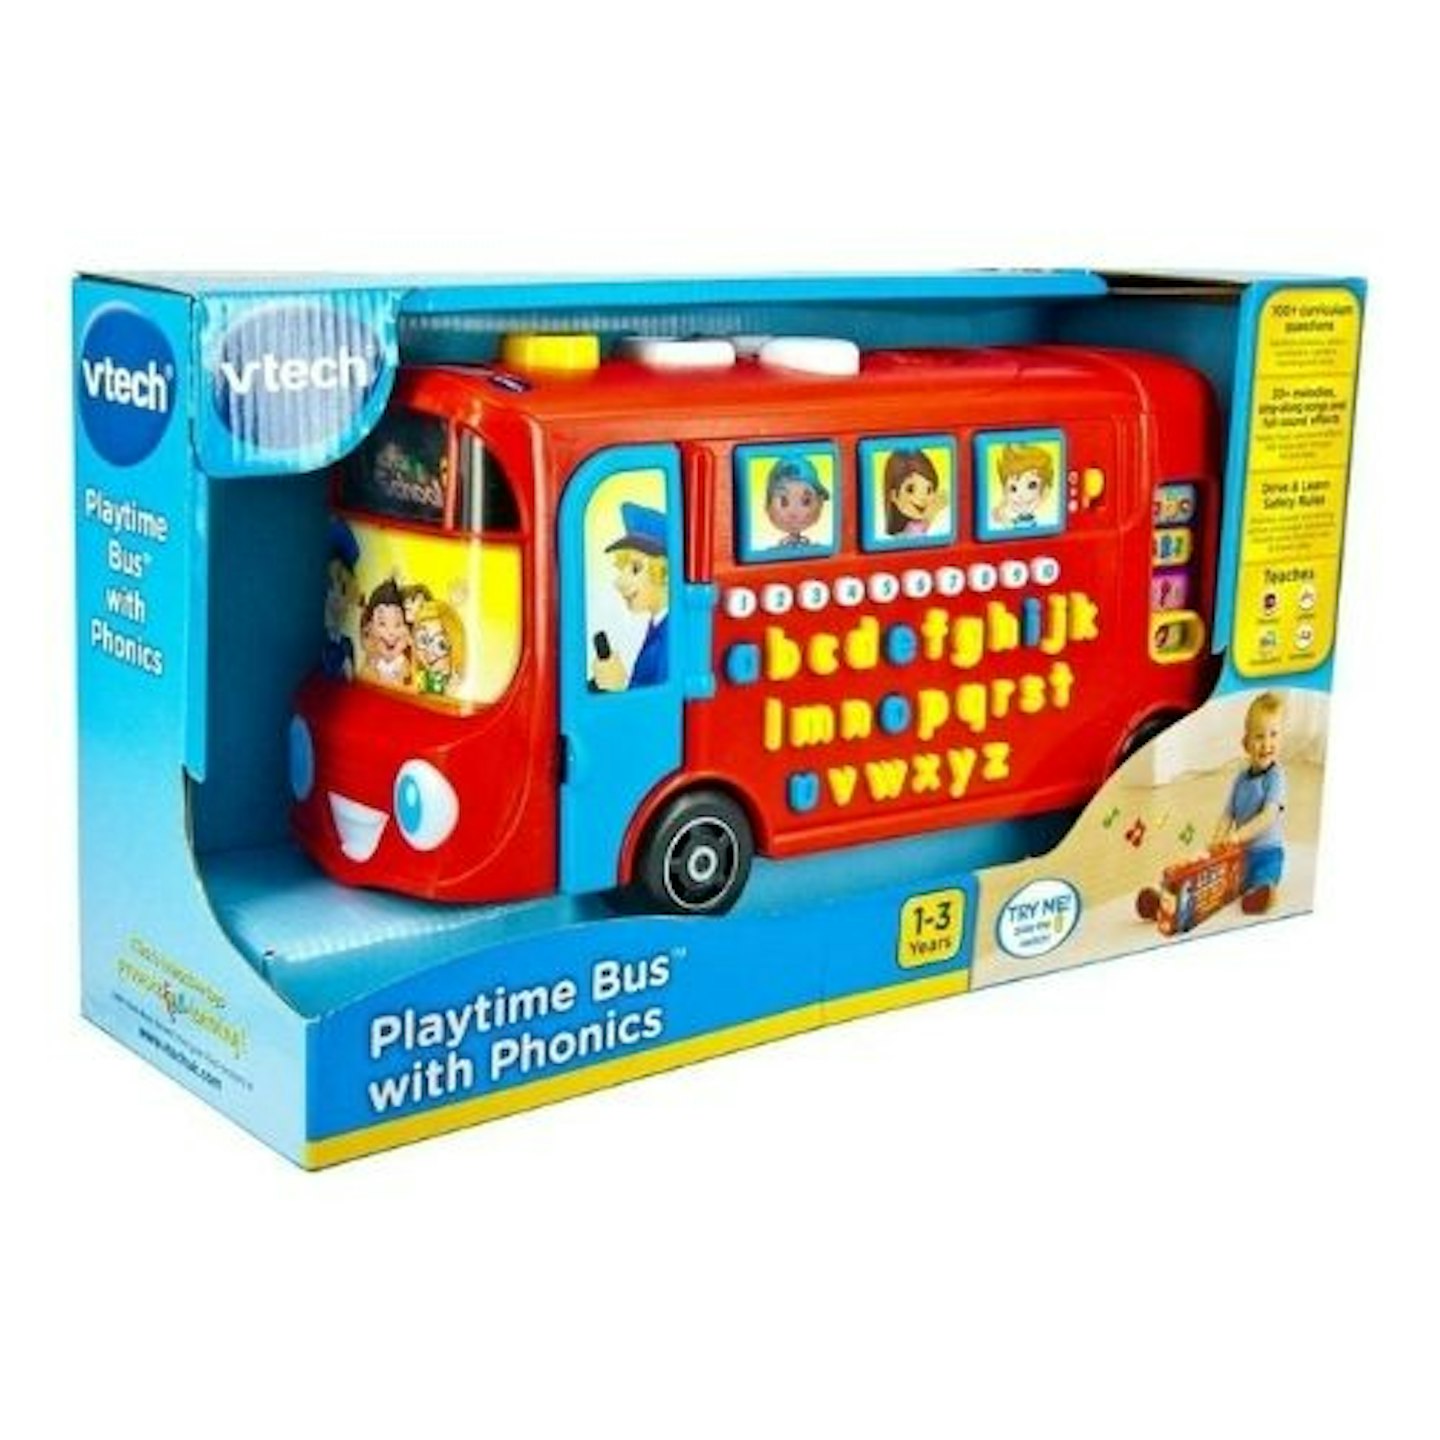  Vtech 150003 Playtime Bus - musical toys for toddlers